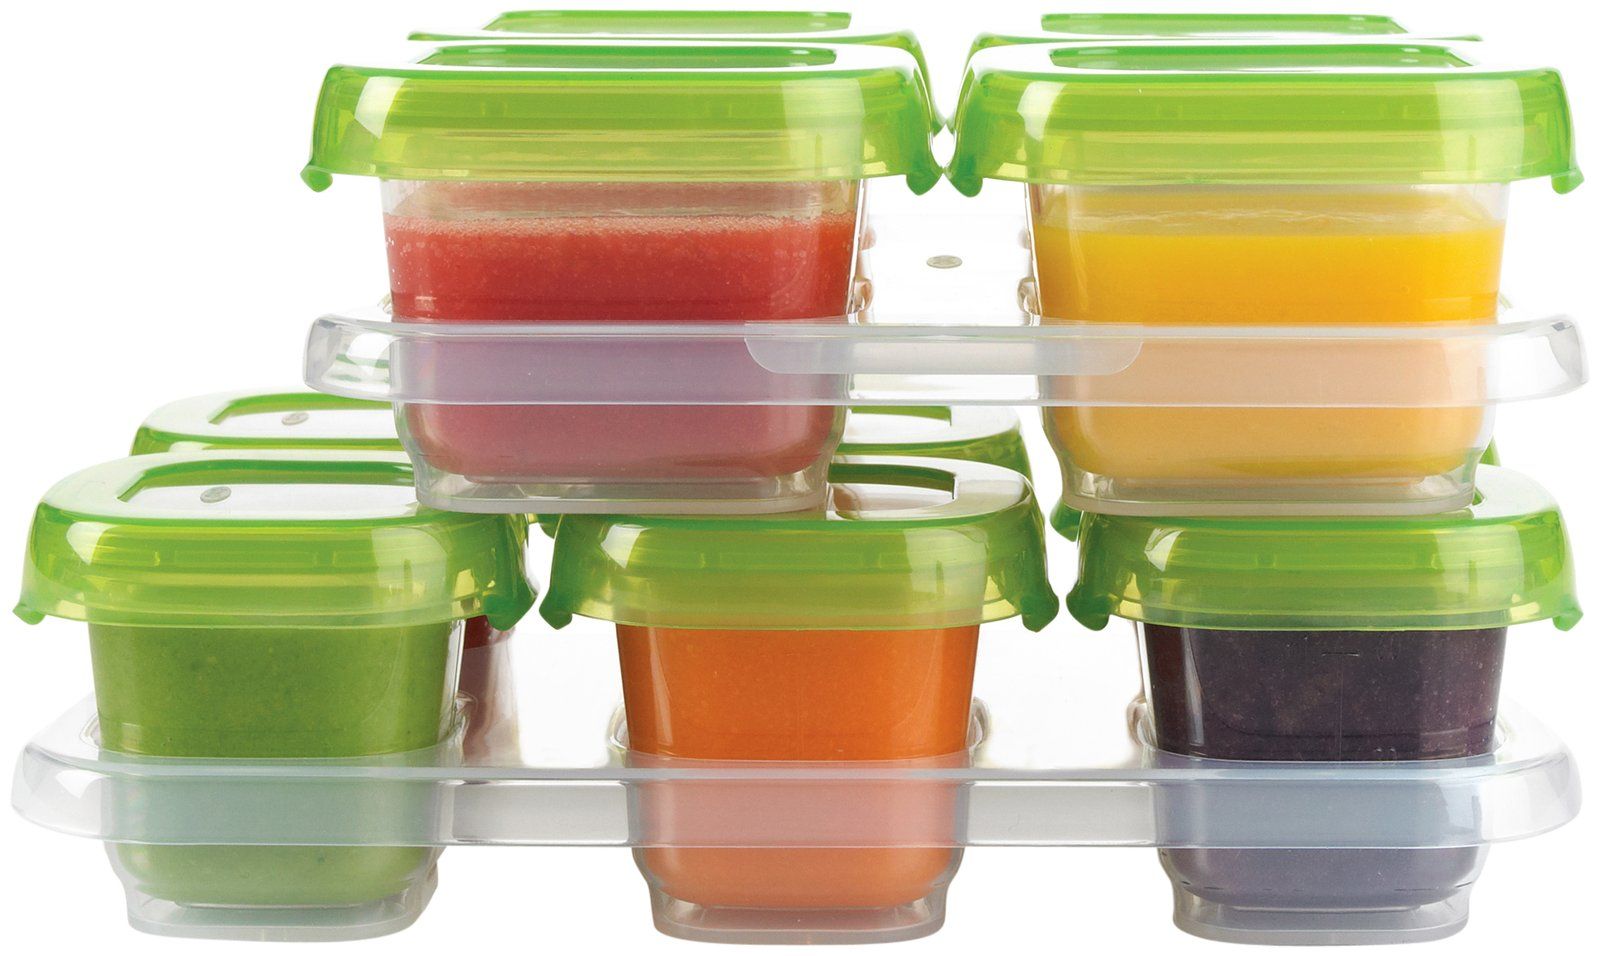 OXO Tot homemade baby food storage containers | Cool Mom Picks